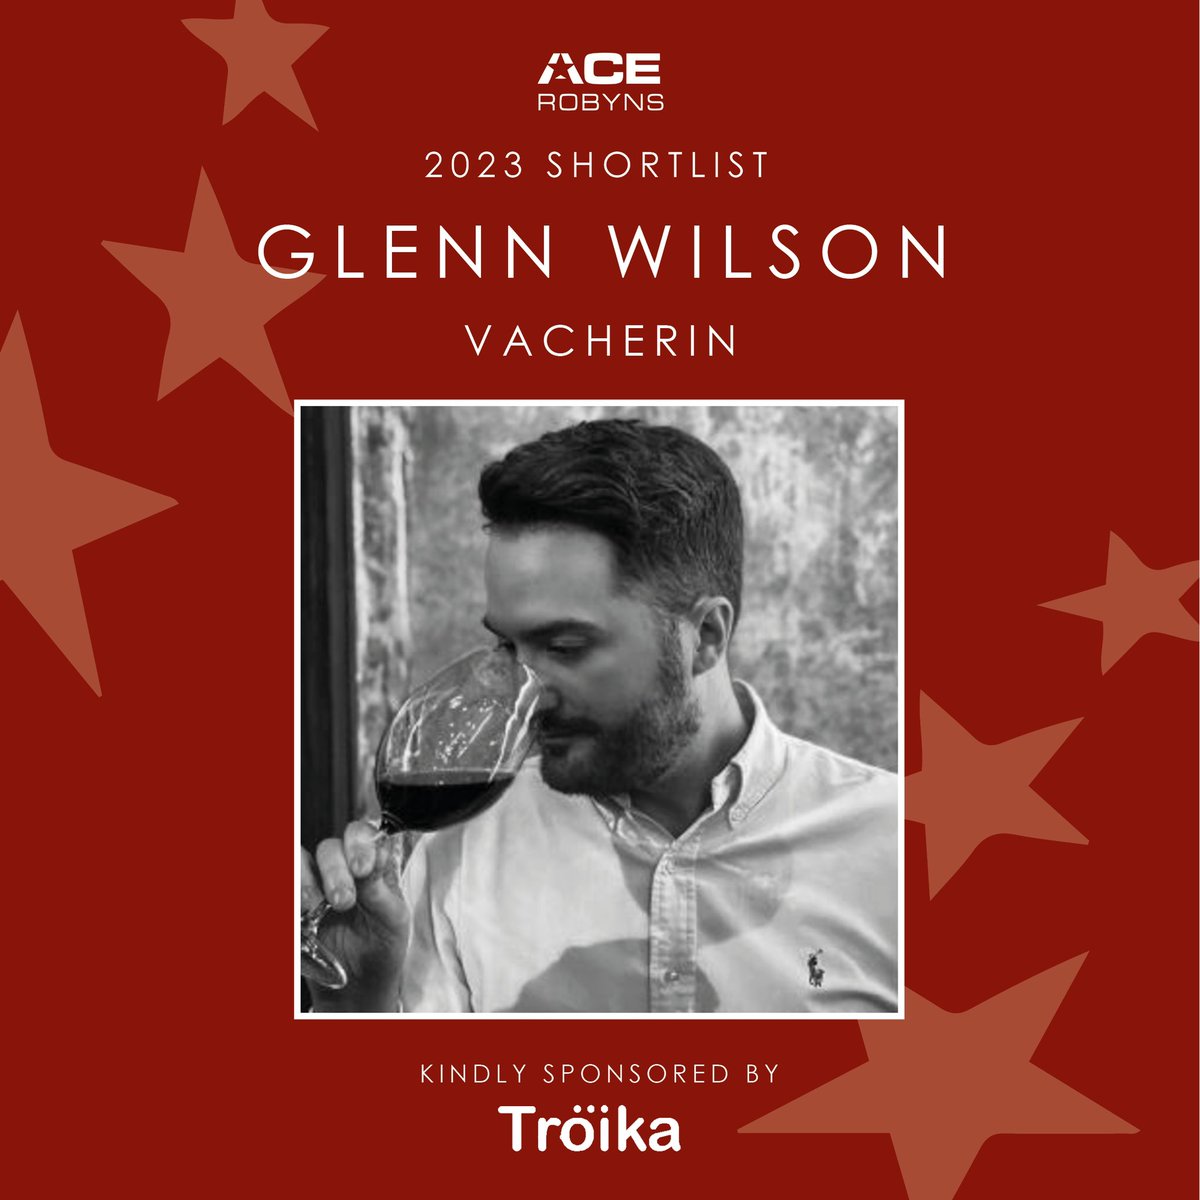 We are excited to announce our first shortlisted ACE Robyn for 2023. Congratulations to Glenn Wilson @VacherinLondon see you on Tuesday 11th July at Bluefin - all welcome it’s also our summer social. Tickets via louise@acegb.org #acerobyns23 #acesummersocial